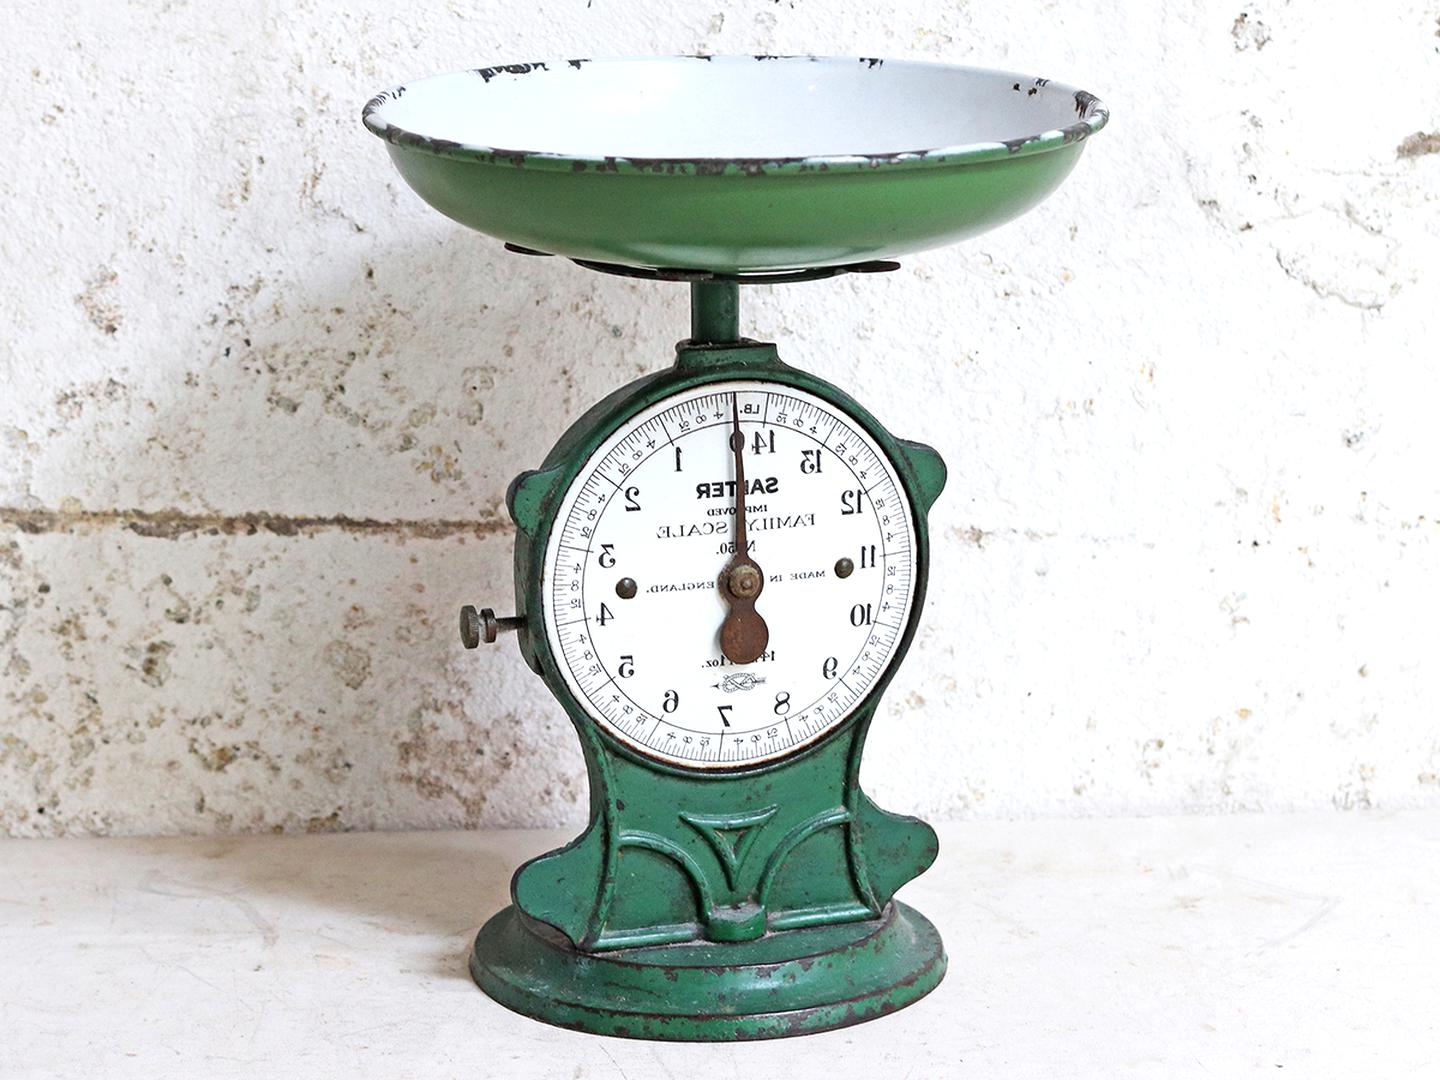 Weighing Scale 1 Vintage%2Bsalter%2Bkitchen%2Bscales 